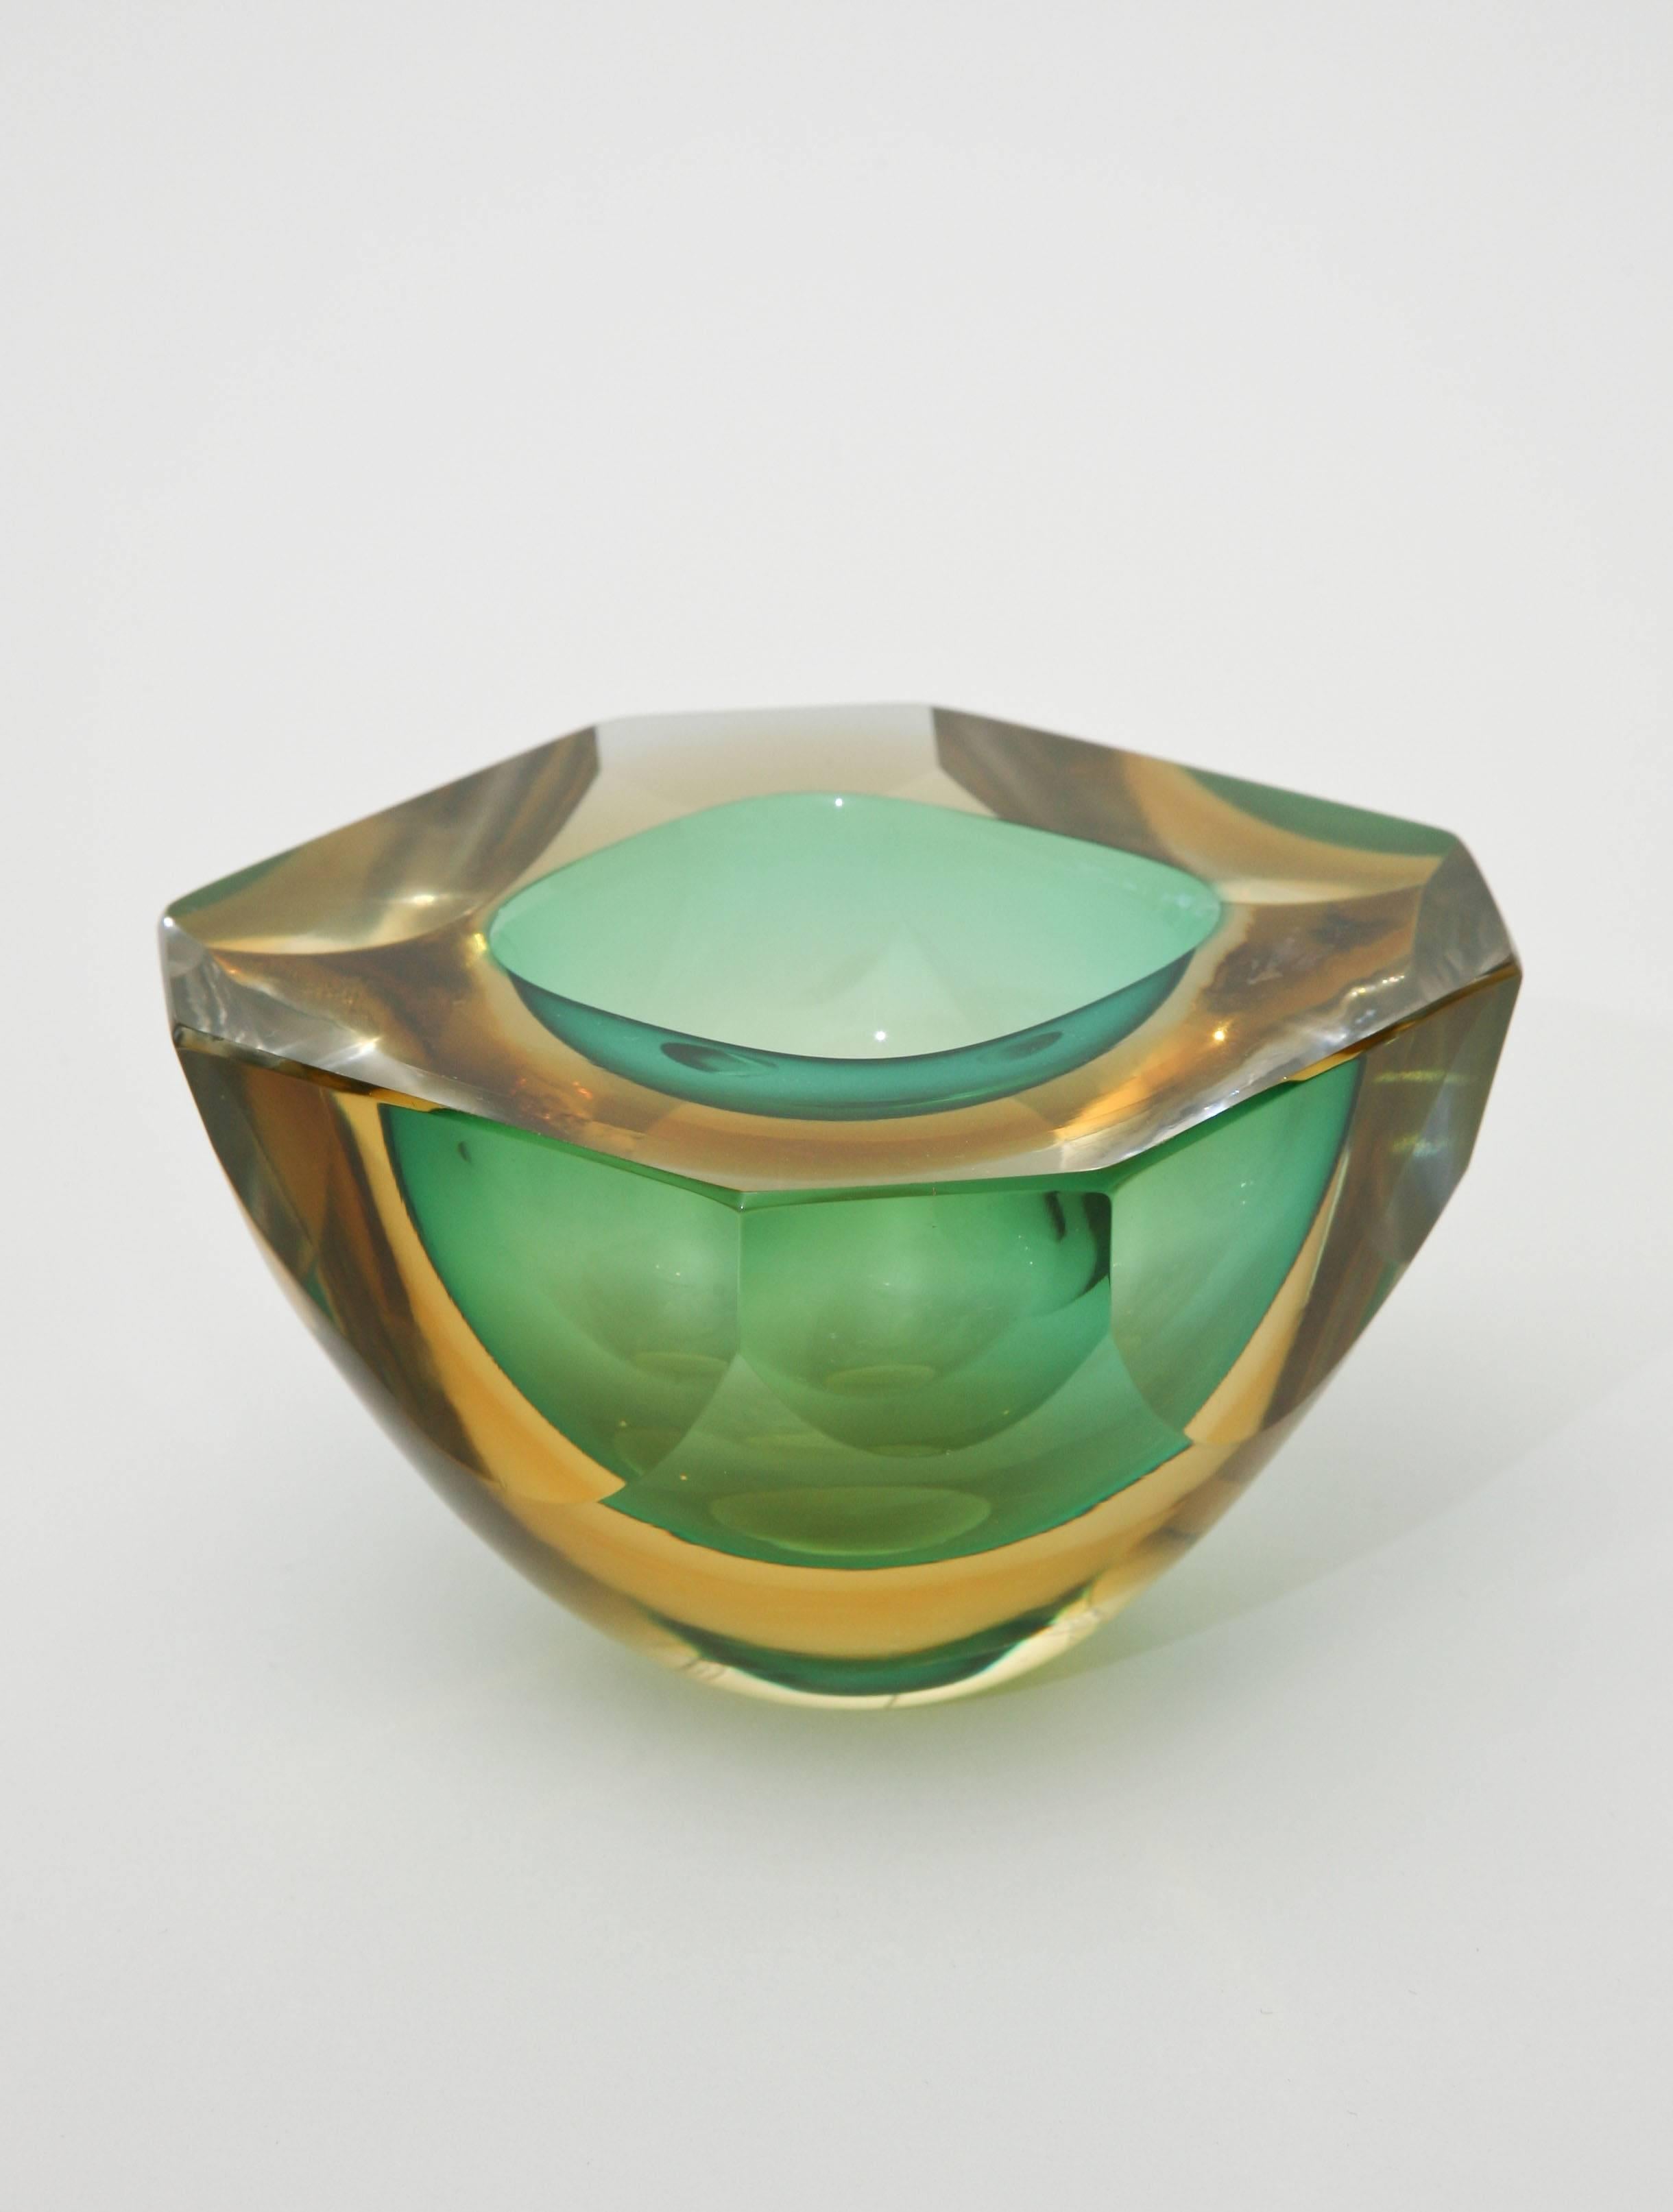 Italian Murano Sommerso Flat Cut Polished Sculptural Geode Bowl 1